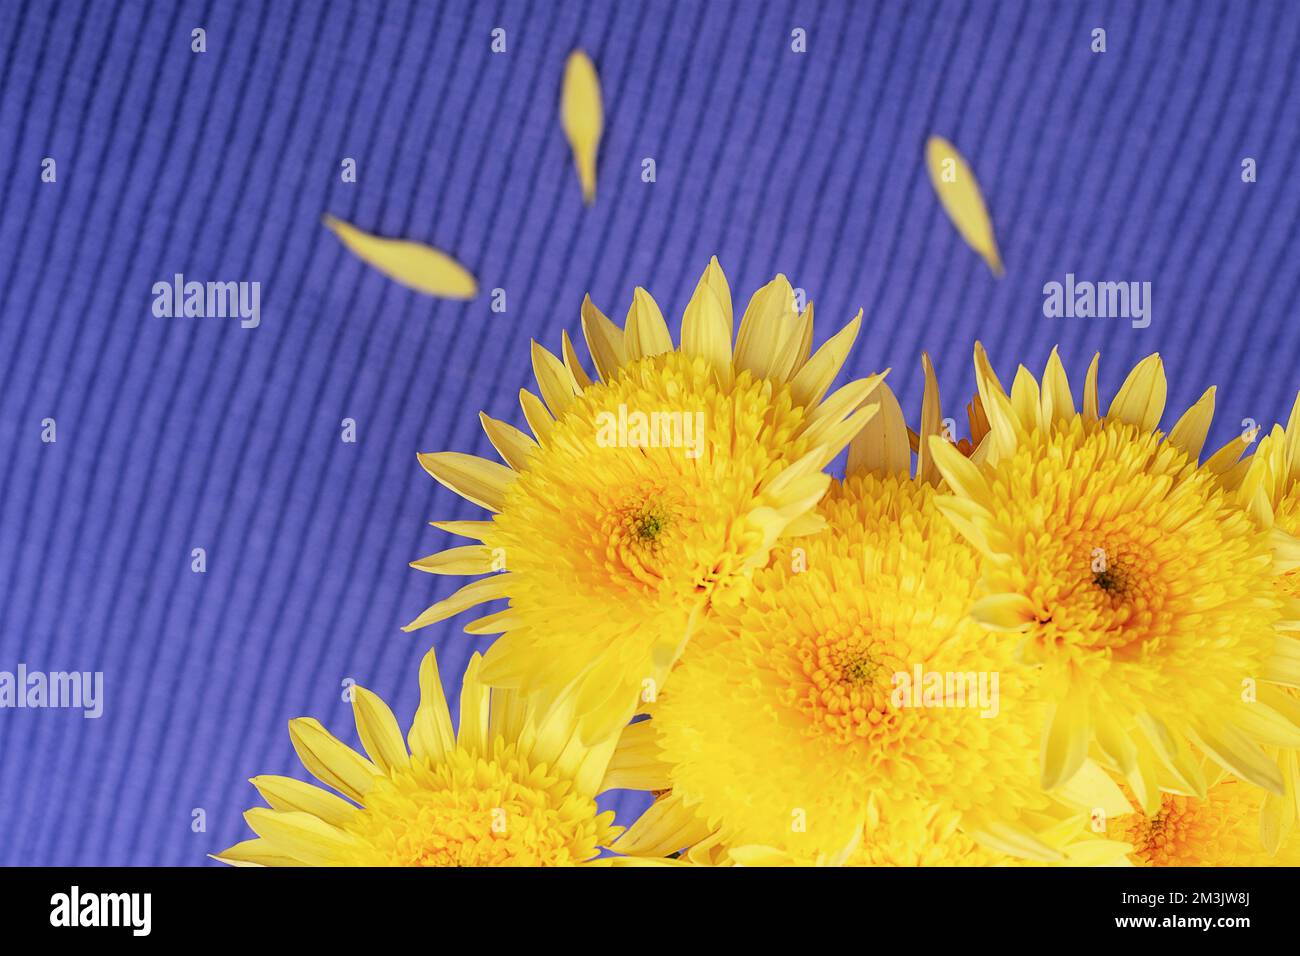 Yellow chrysanthemum flowers on the background of blue knitted fabric. Top view. Stock Photo